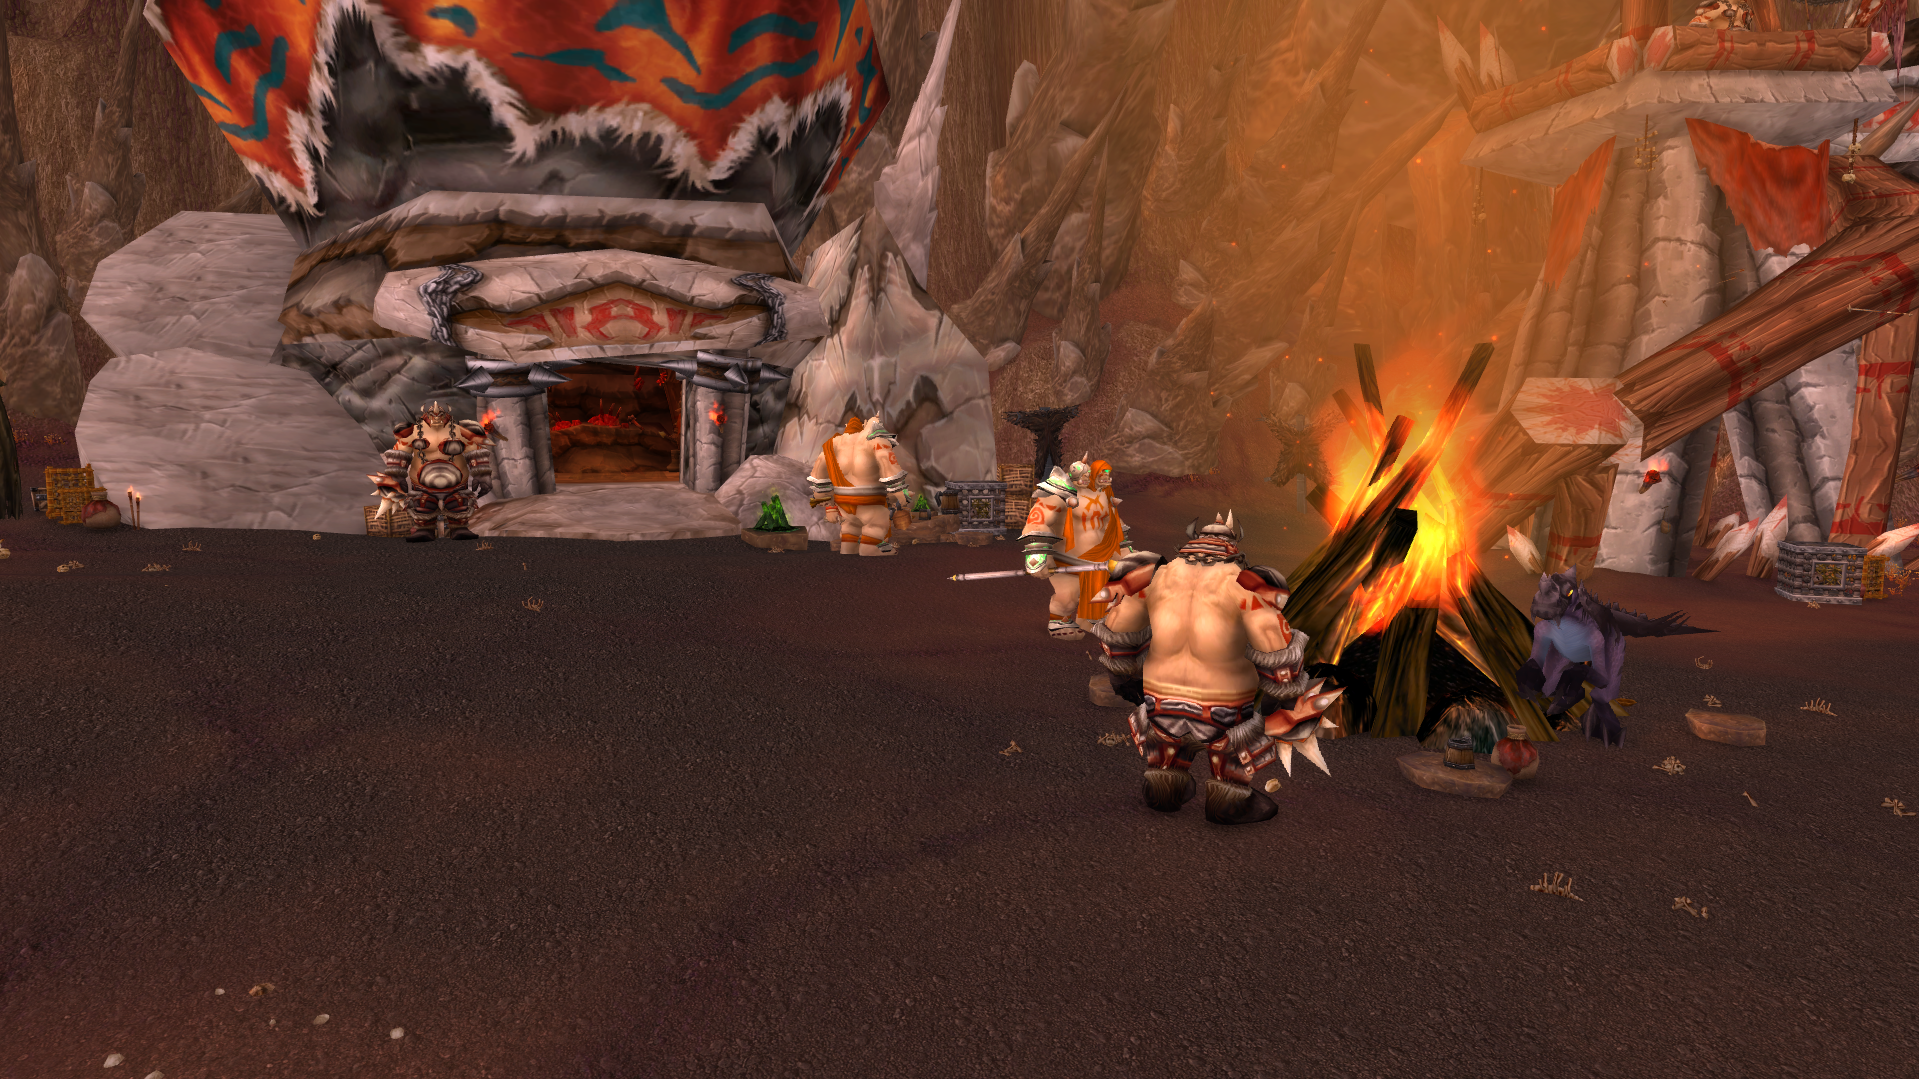 WoW Ogres are resting by the campfire